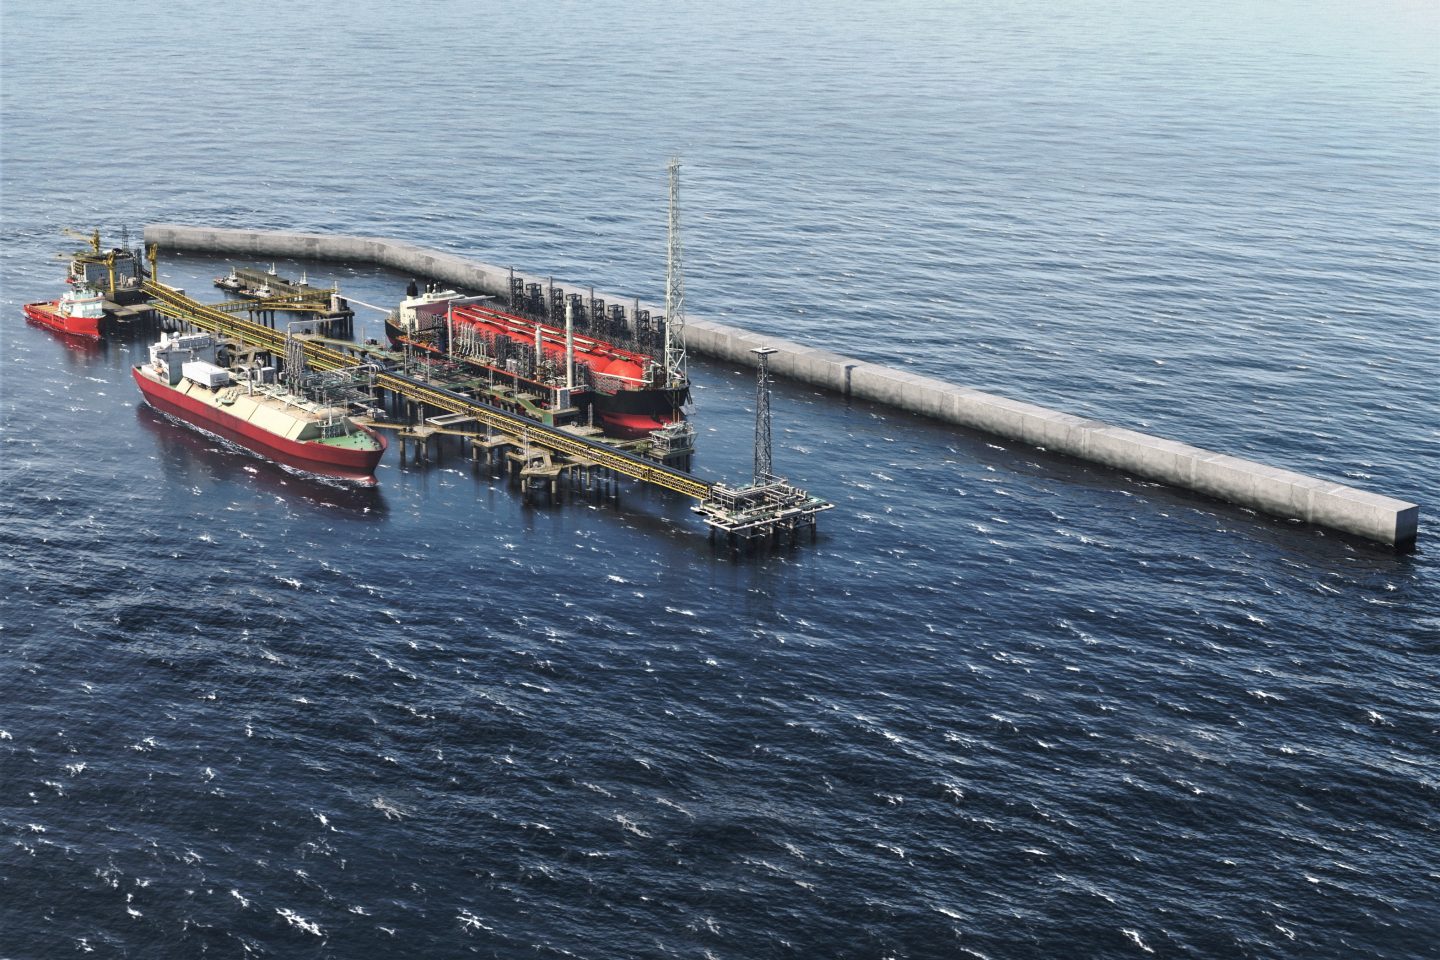 Kosmos Energy says Greater Tortue Ahmeyim LNG project is 75% complete